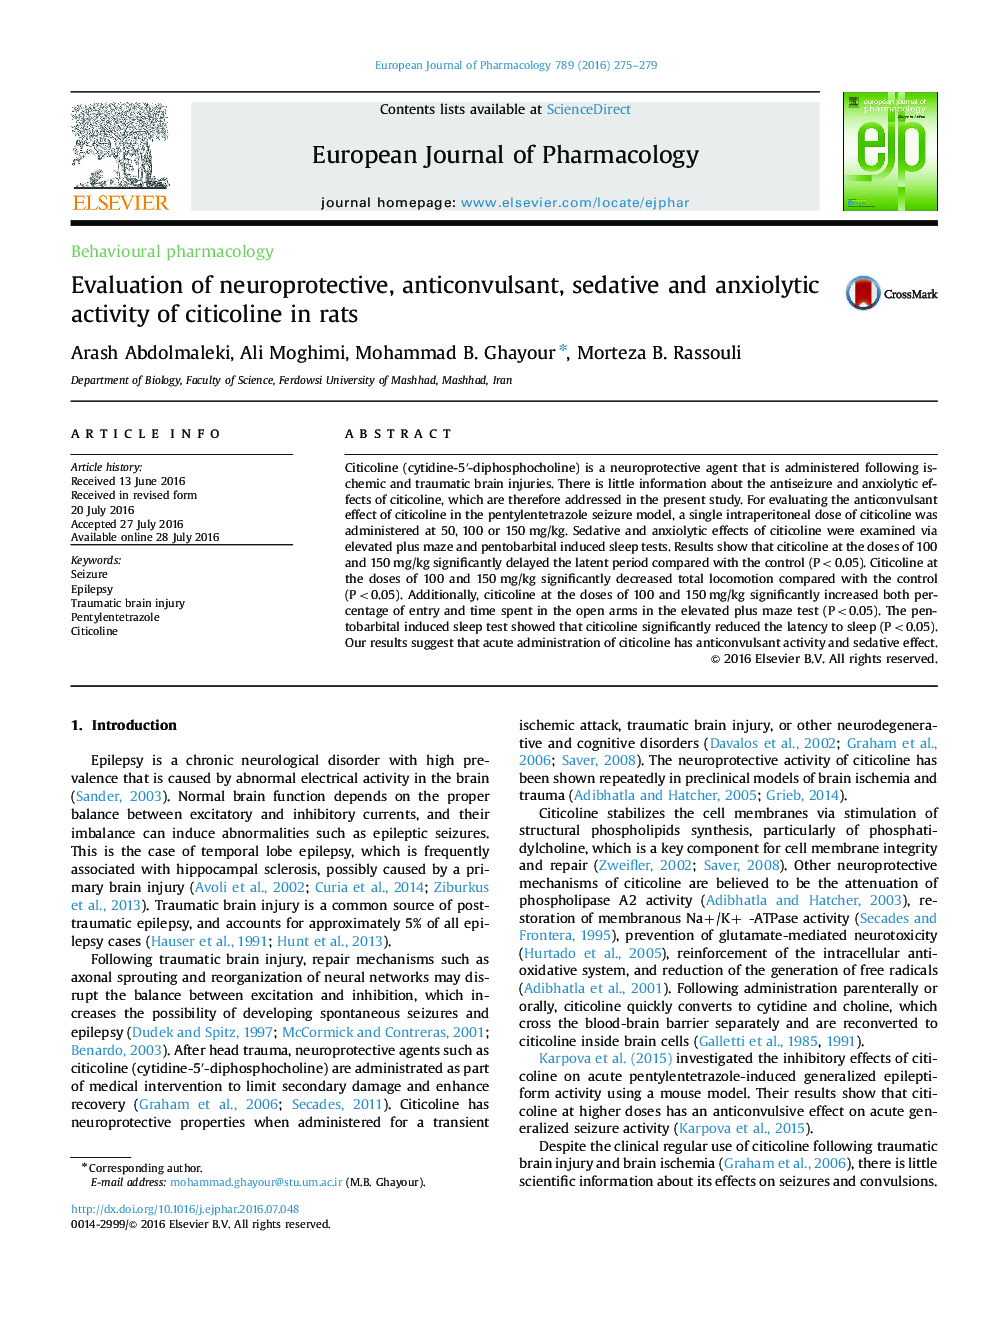 Evaluation of neuroprotective, anticonvulsant, sedative and anxiolytic activity of citicoline in rats